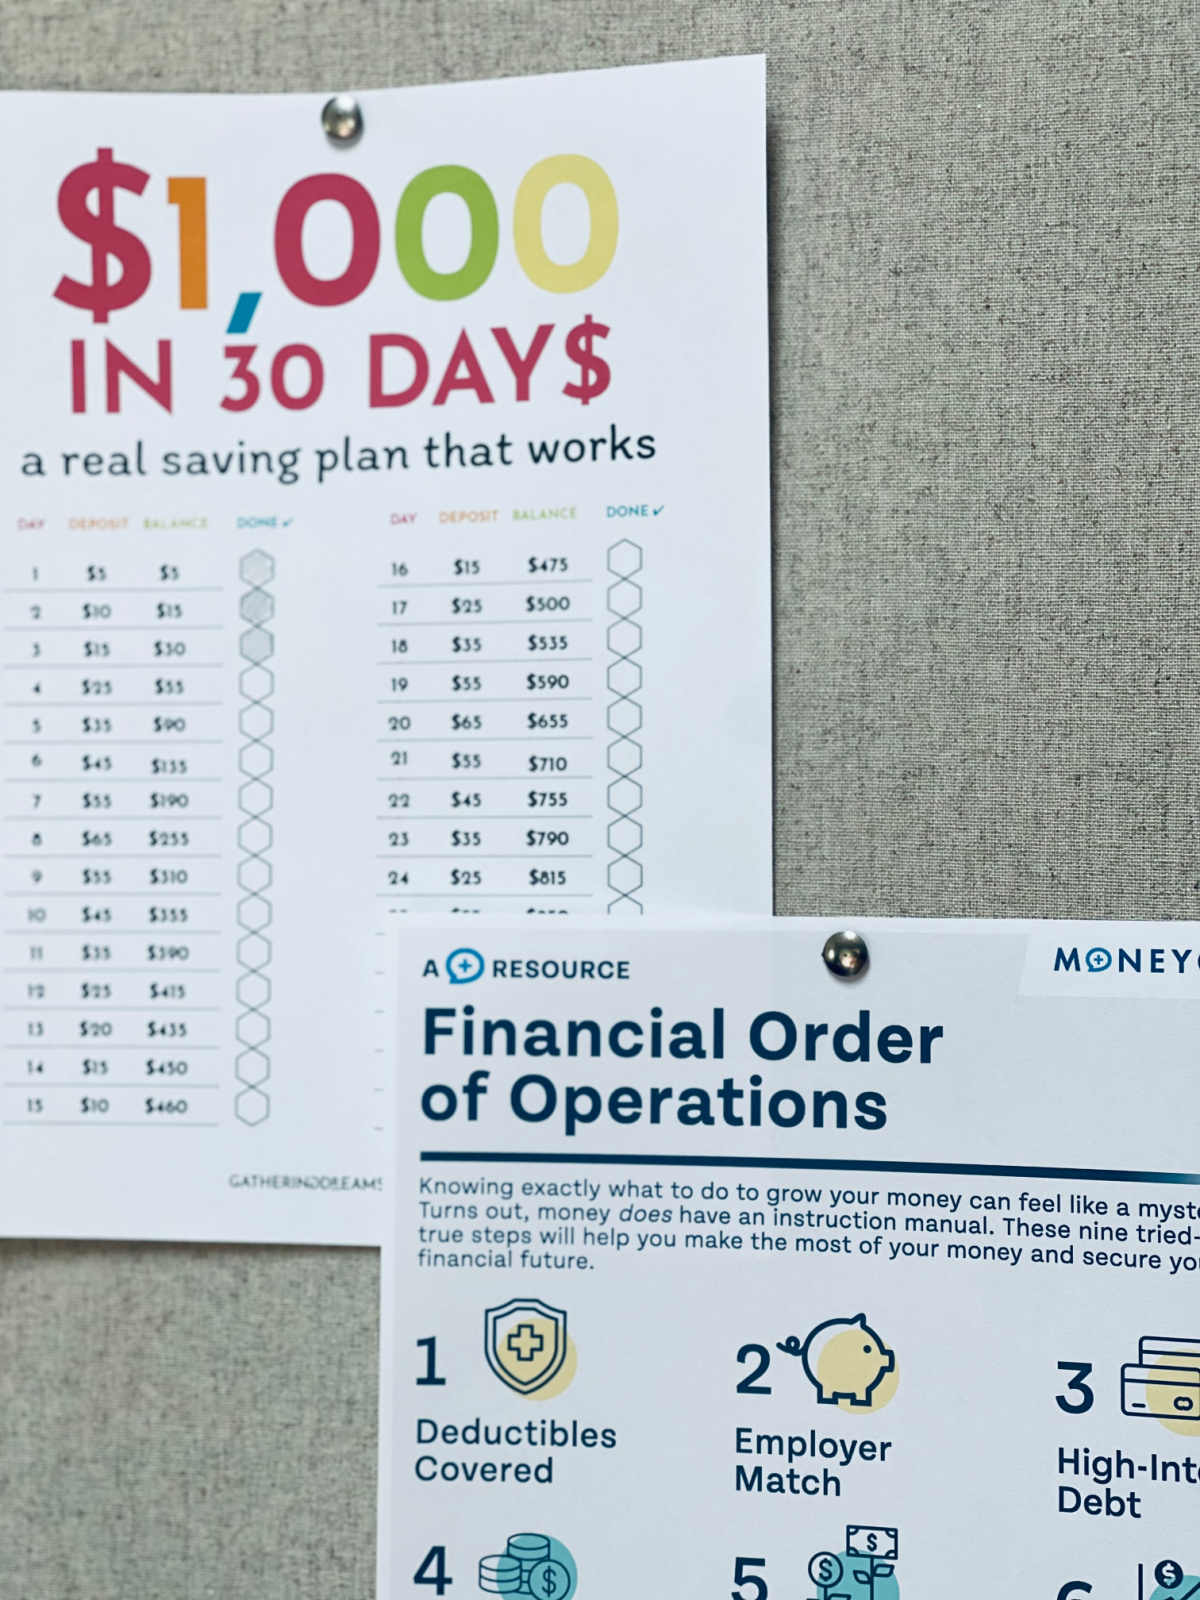 Money Guy Financial Order of Operations and savings tracker on bulletin board.